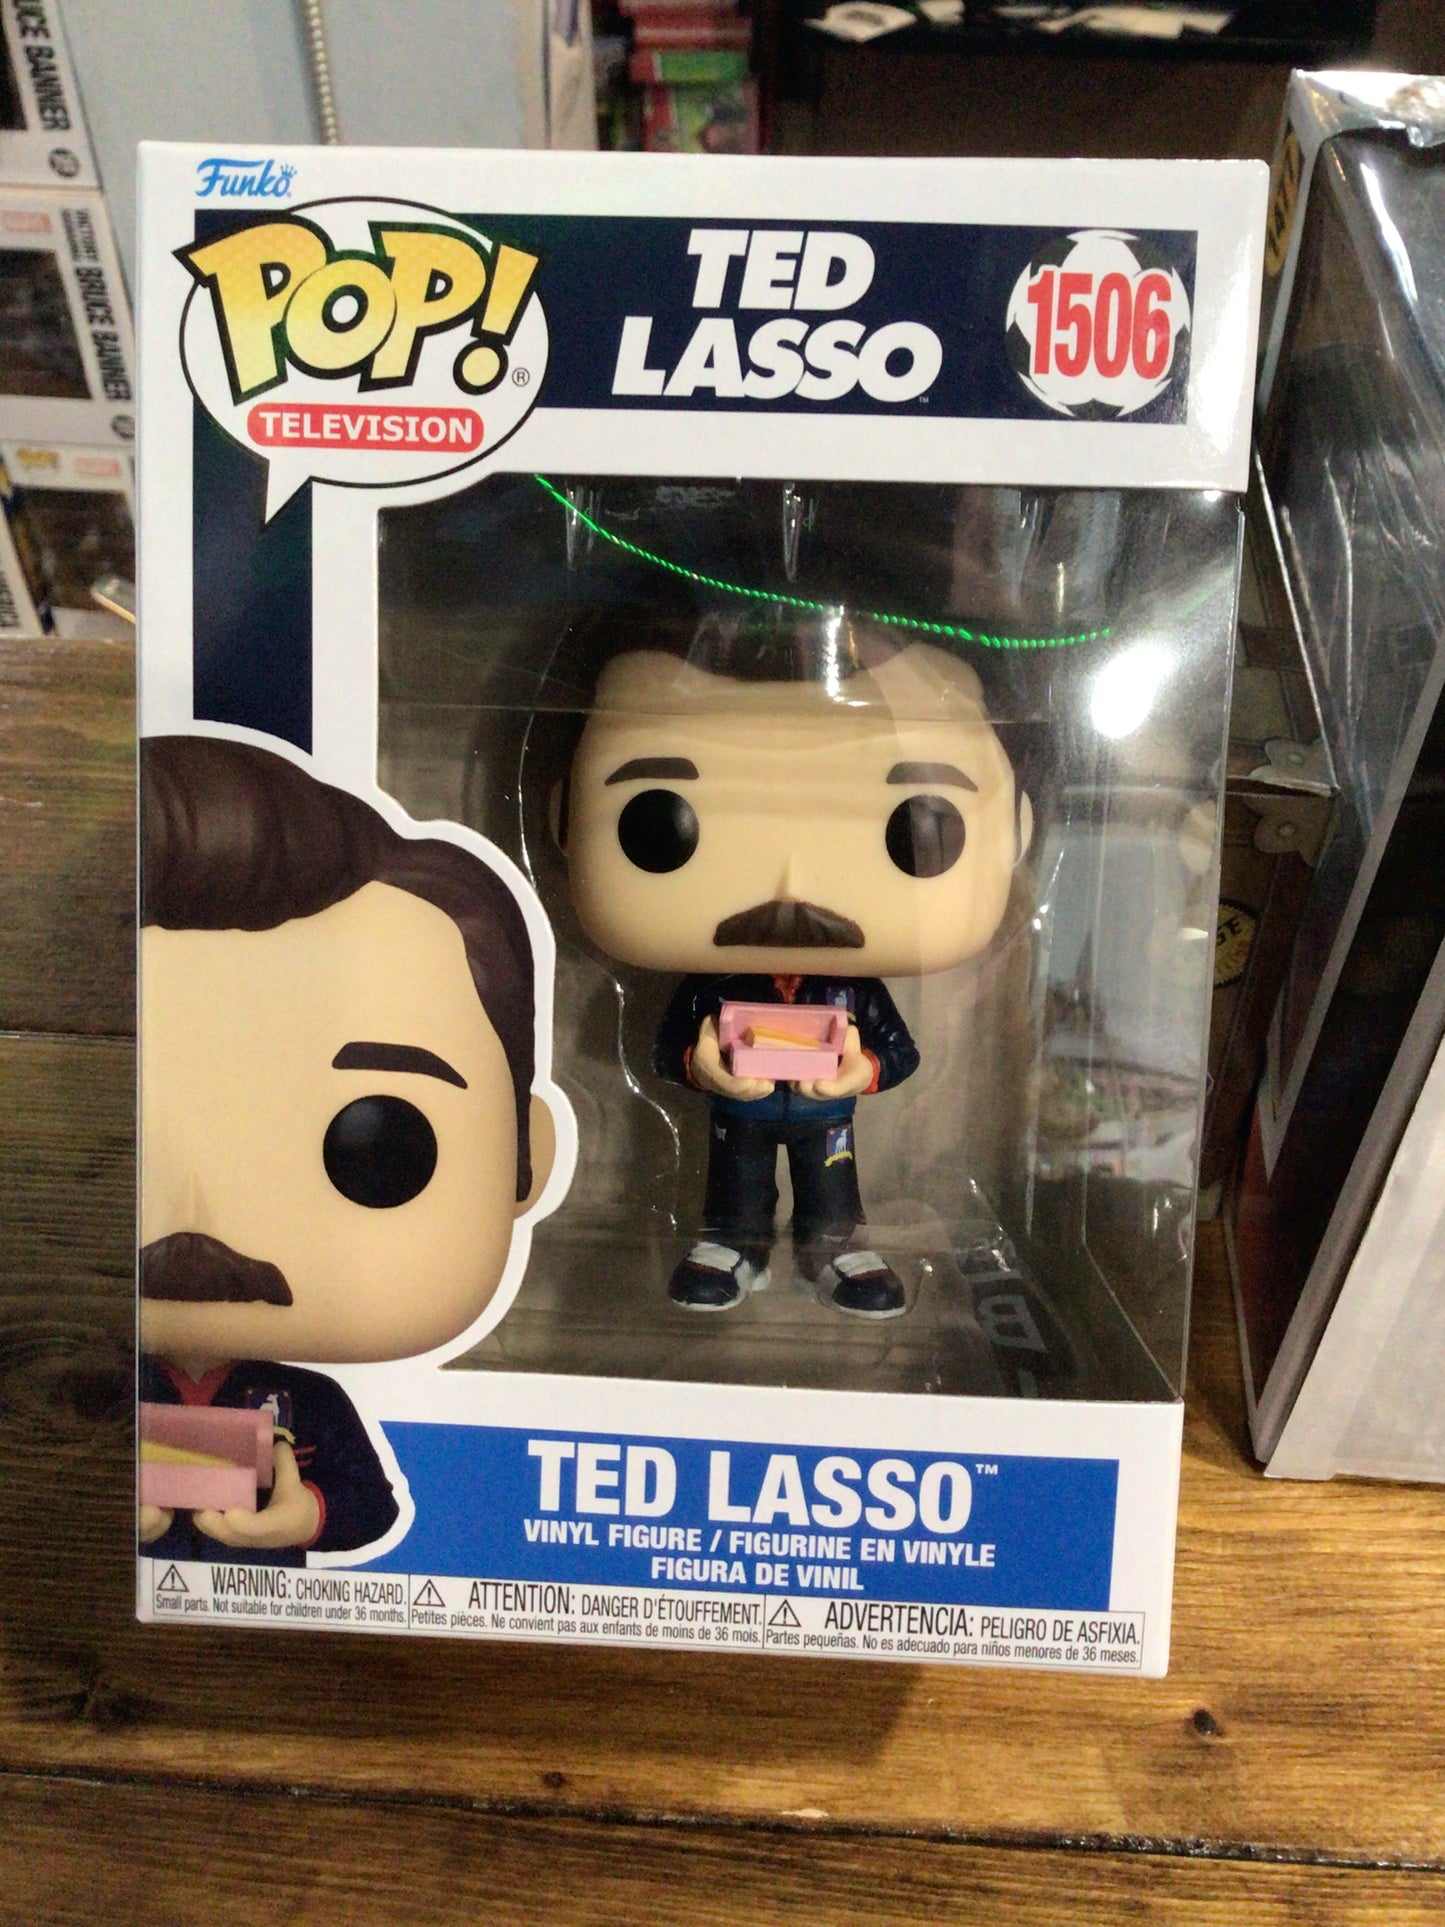 Ted Lasso - Ted Lasso w/ Biscuits #1506- Funko Pop! Vinyl Figure (Television)